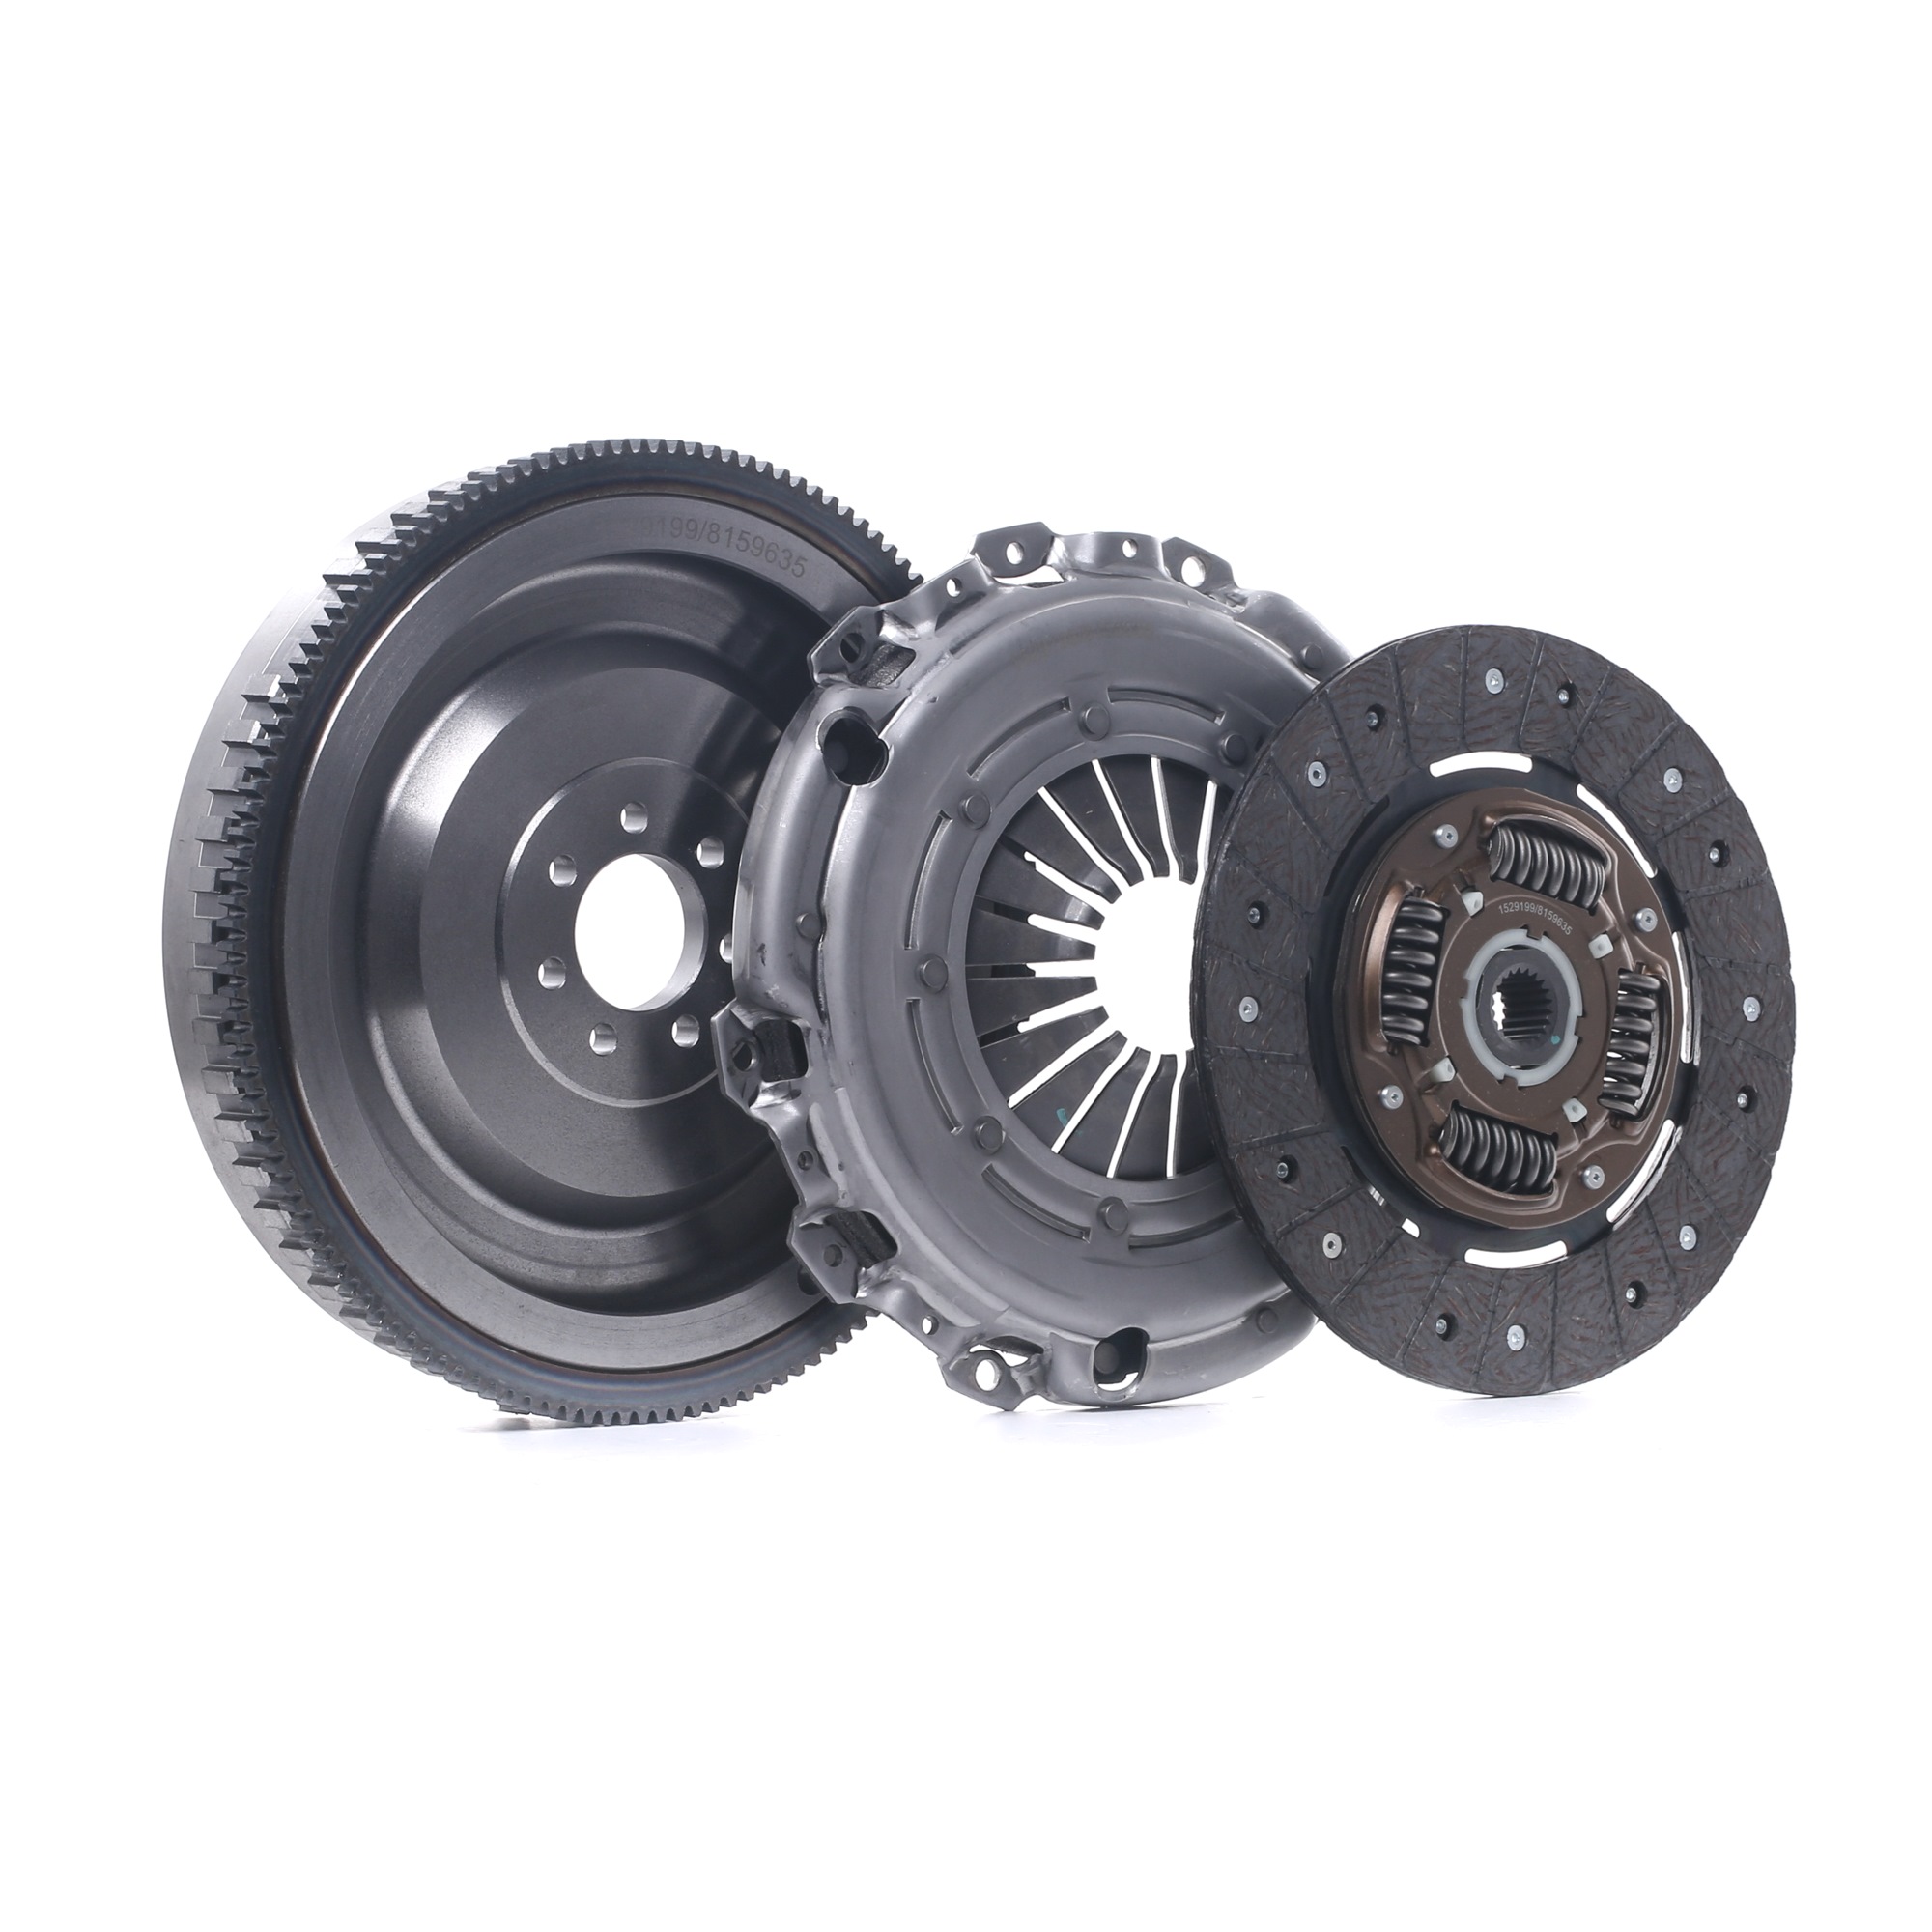 RIDEX 479C0053 Clutch kit with clutch pressure plate, with flywheel, with clutch disc, with screw set, 240mm